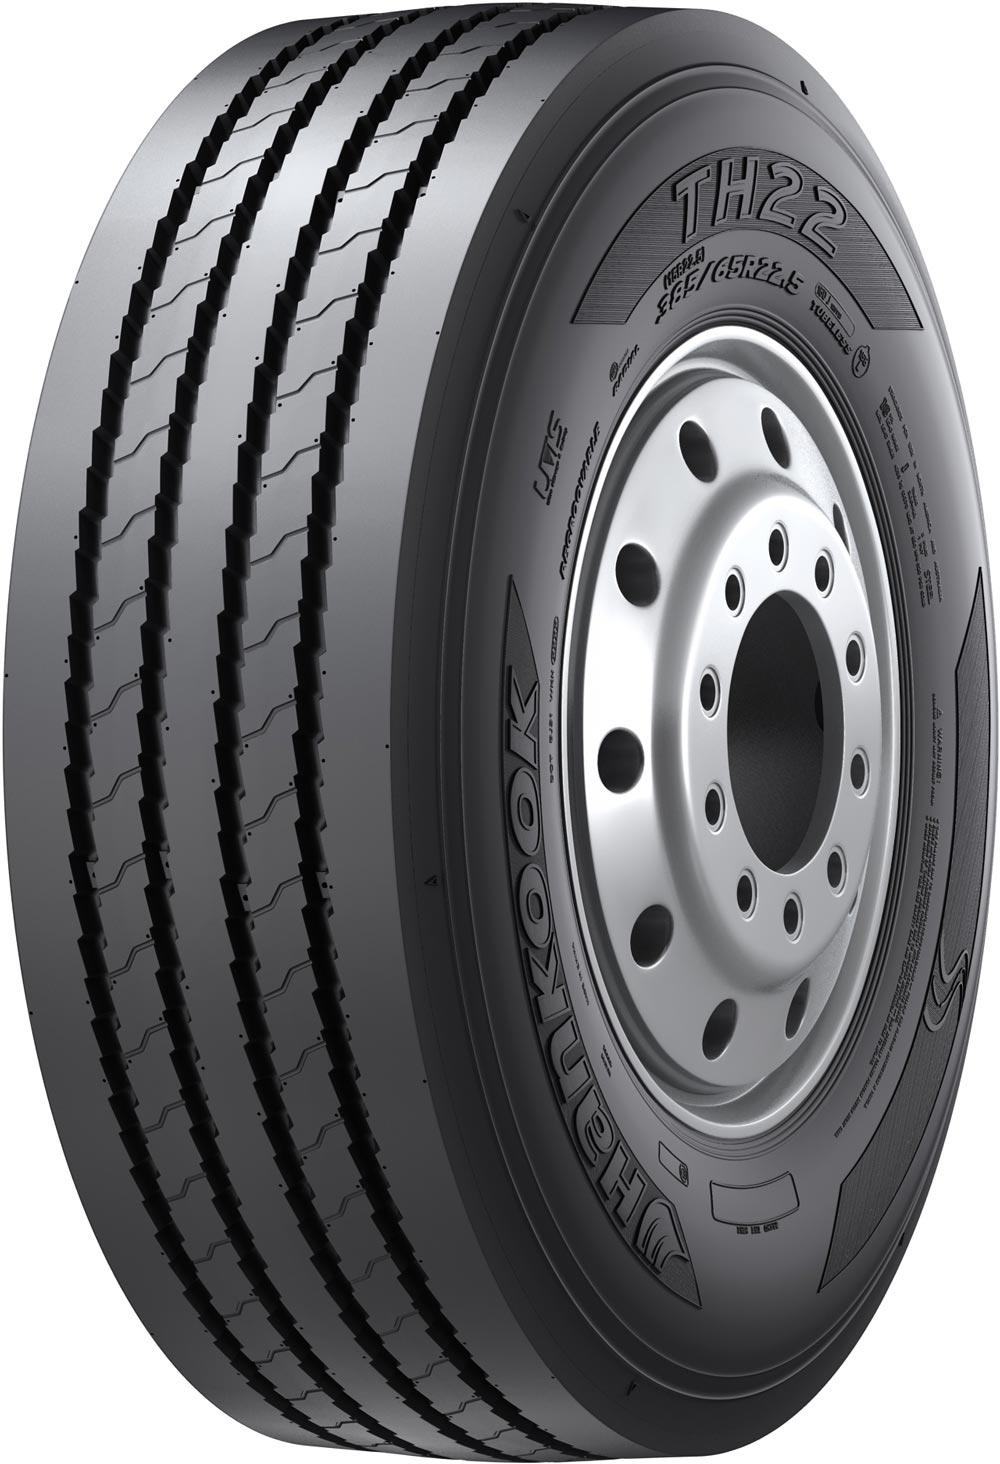 product_type-heavy_tires HANKOOK TH22 385/65 R22.5 160K